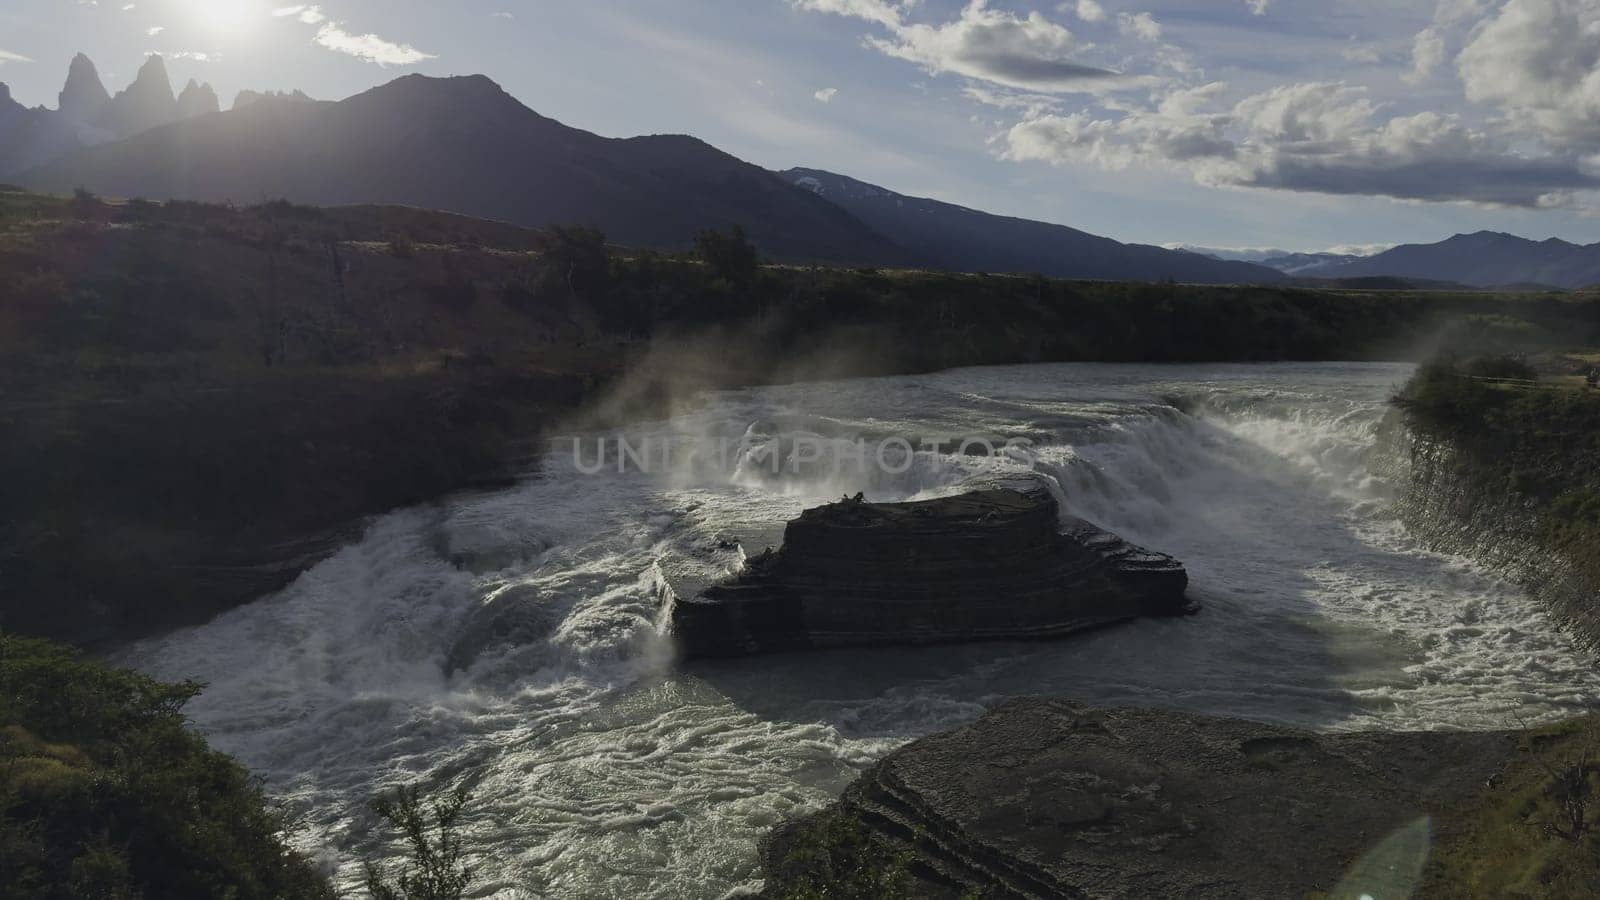 Slow-mo video captures a majestic waterfall at dusk with Torres del Paine silhouetted against the setting sun.